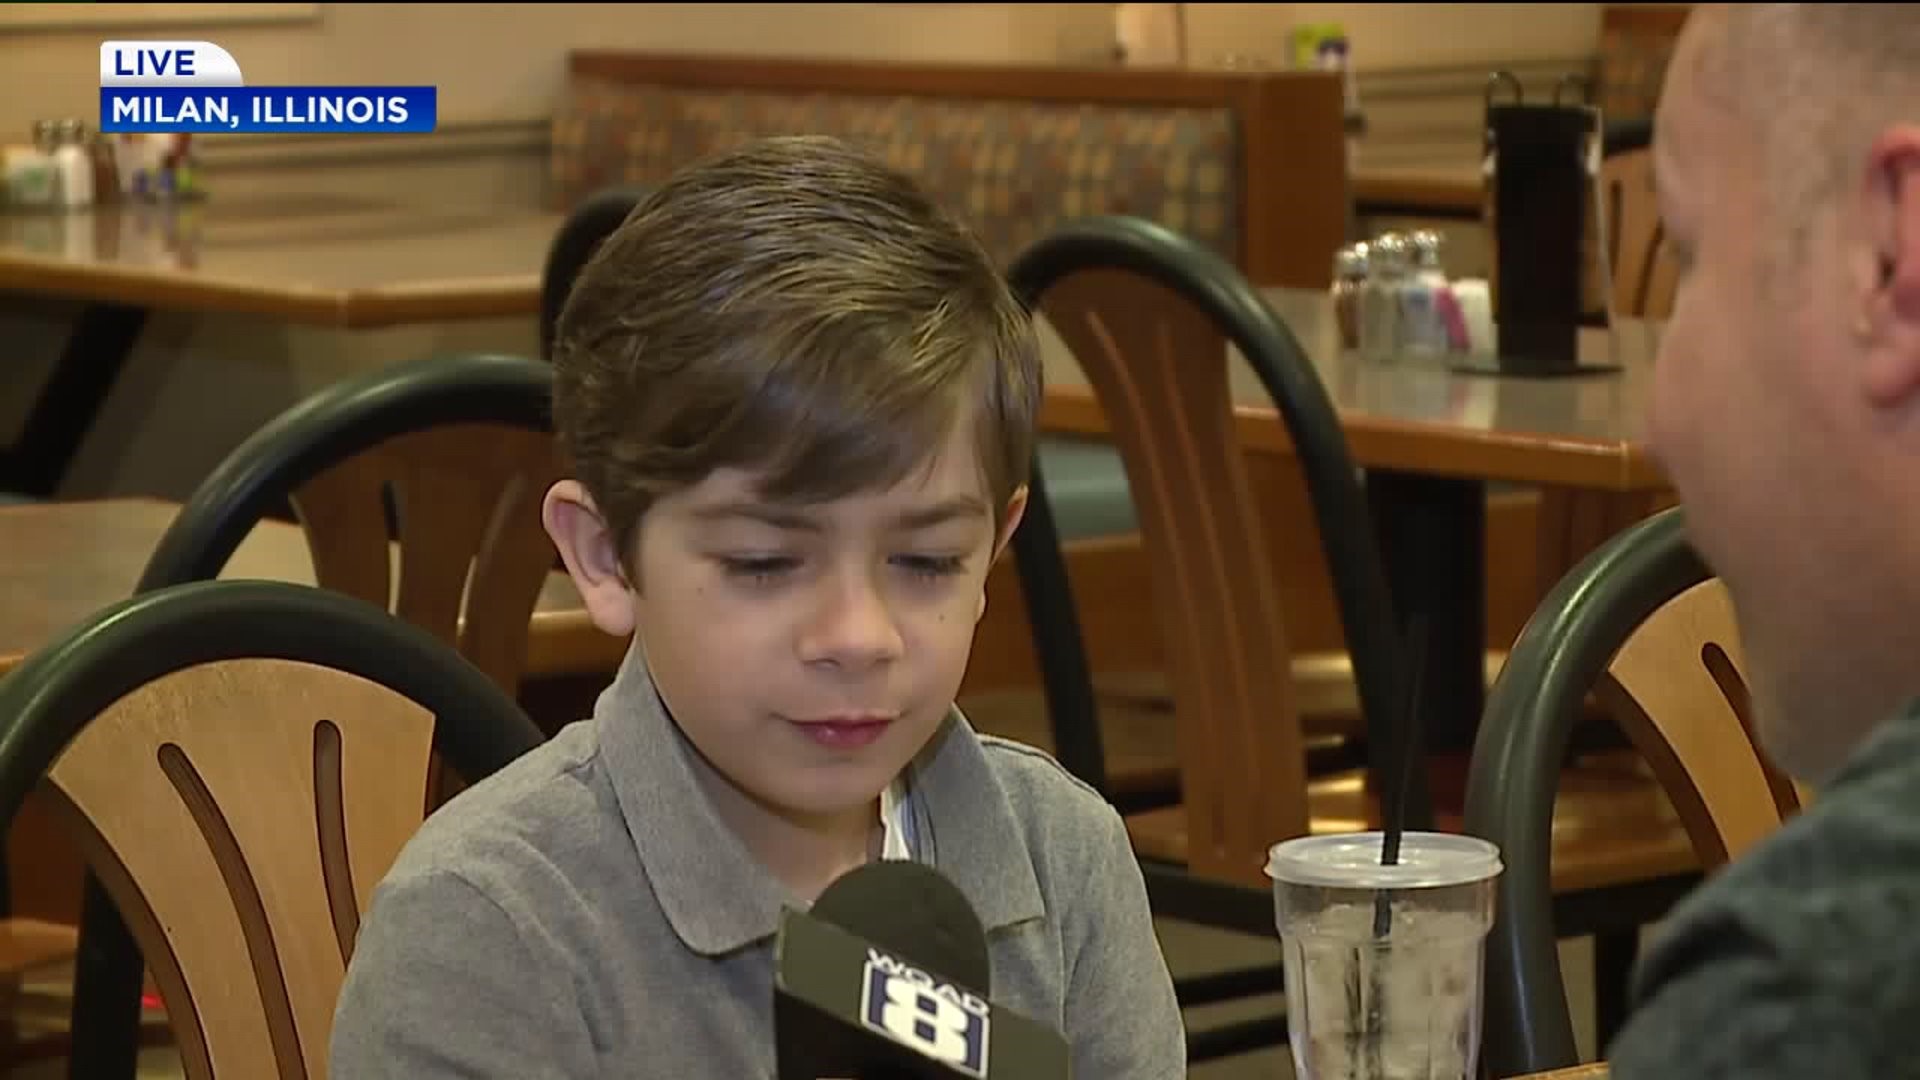 QC Restaurant Week: Meet the kid with his own specialty pizza